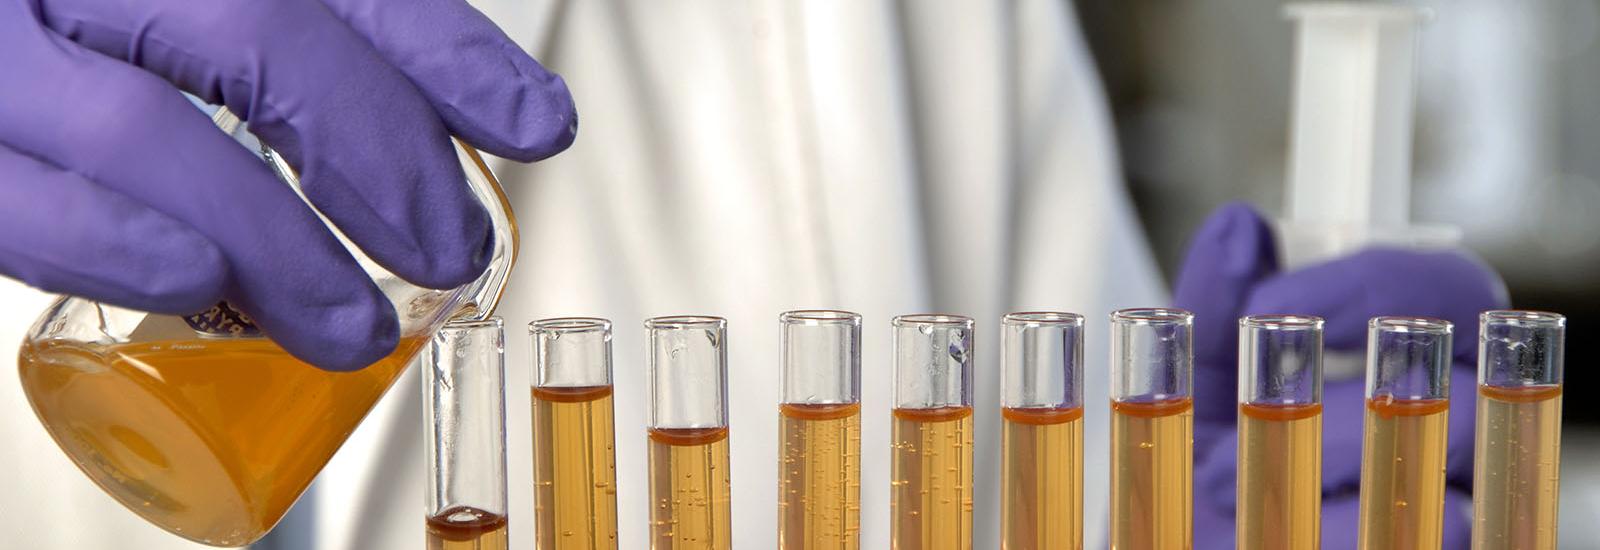 Photograph of scientist pouring colored liquid into row of test tubes.